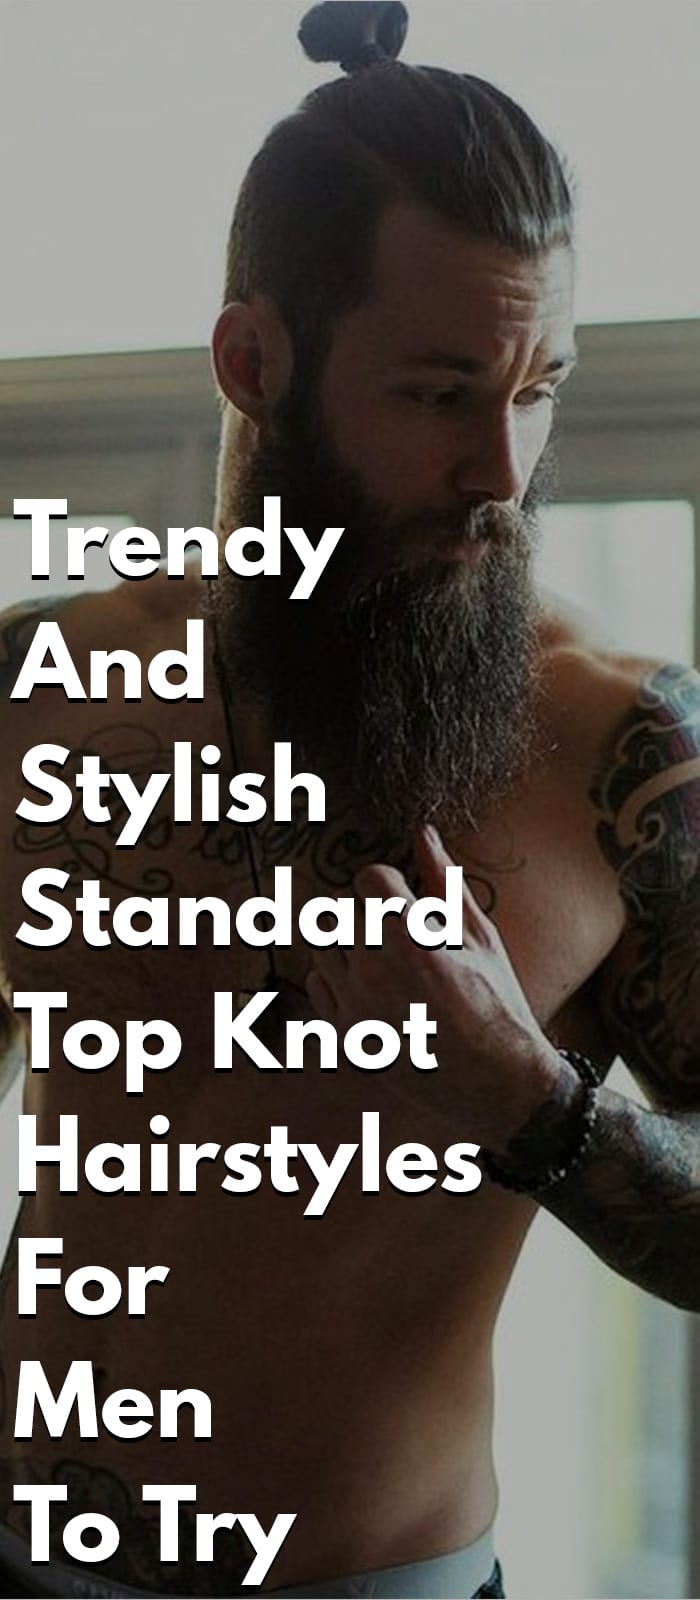 Standard Top Knot Hairstyles For Men To Try